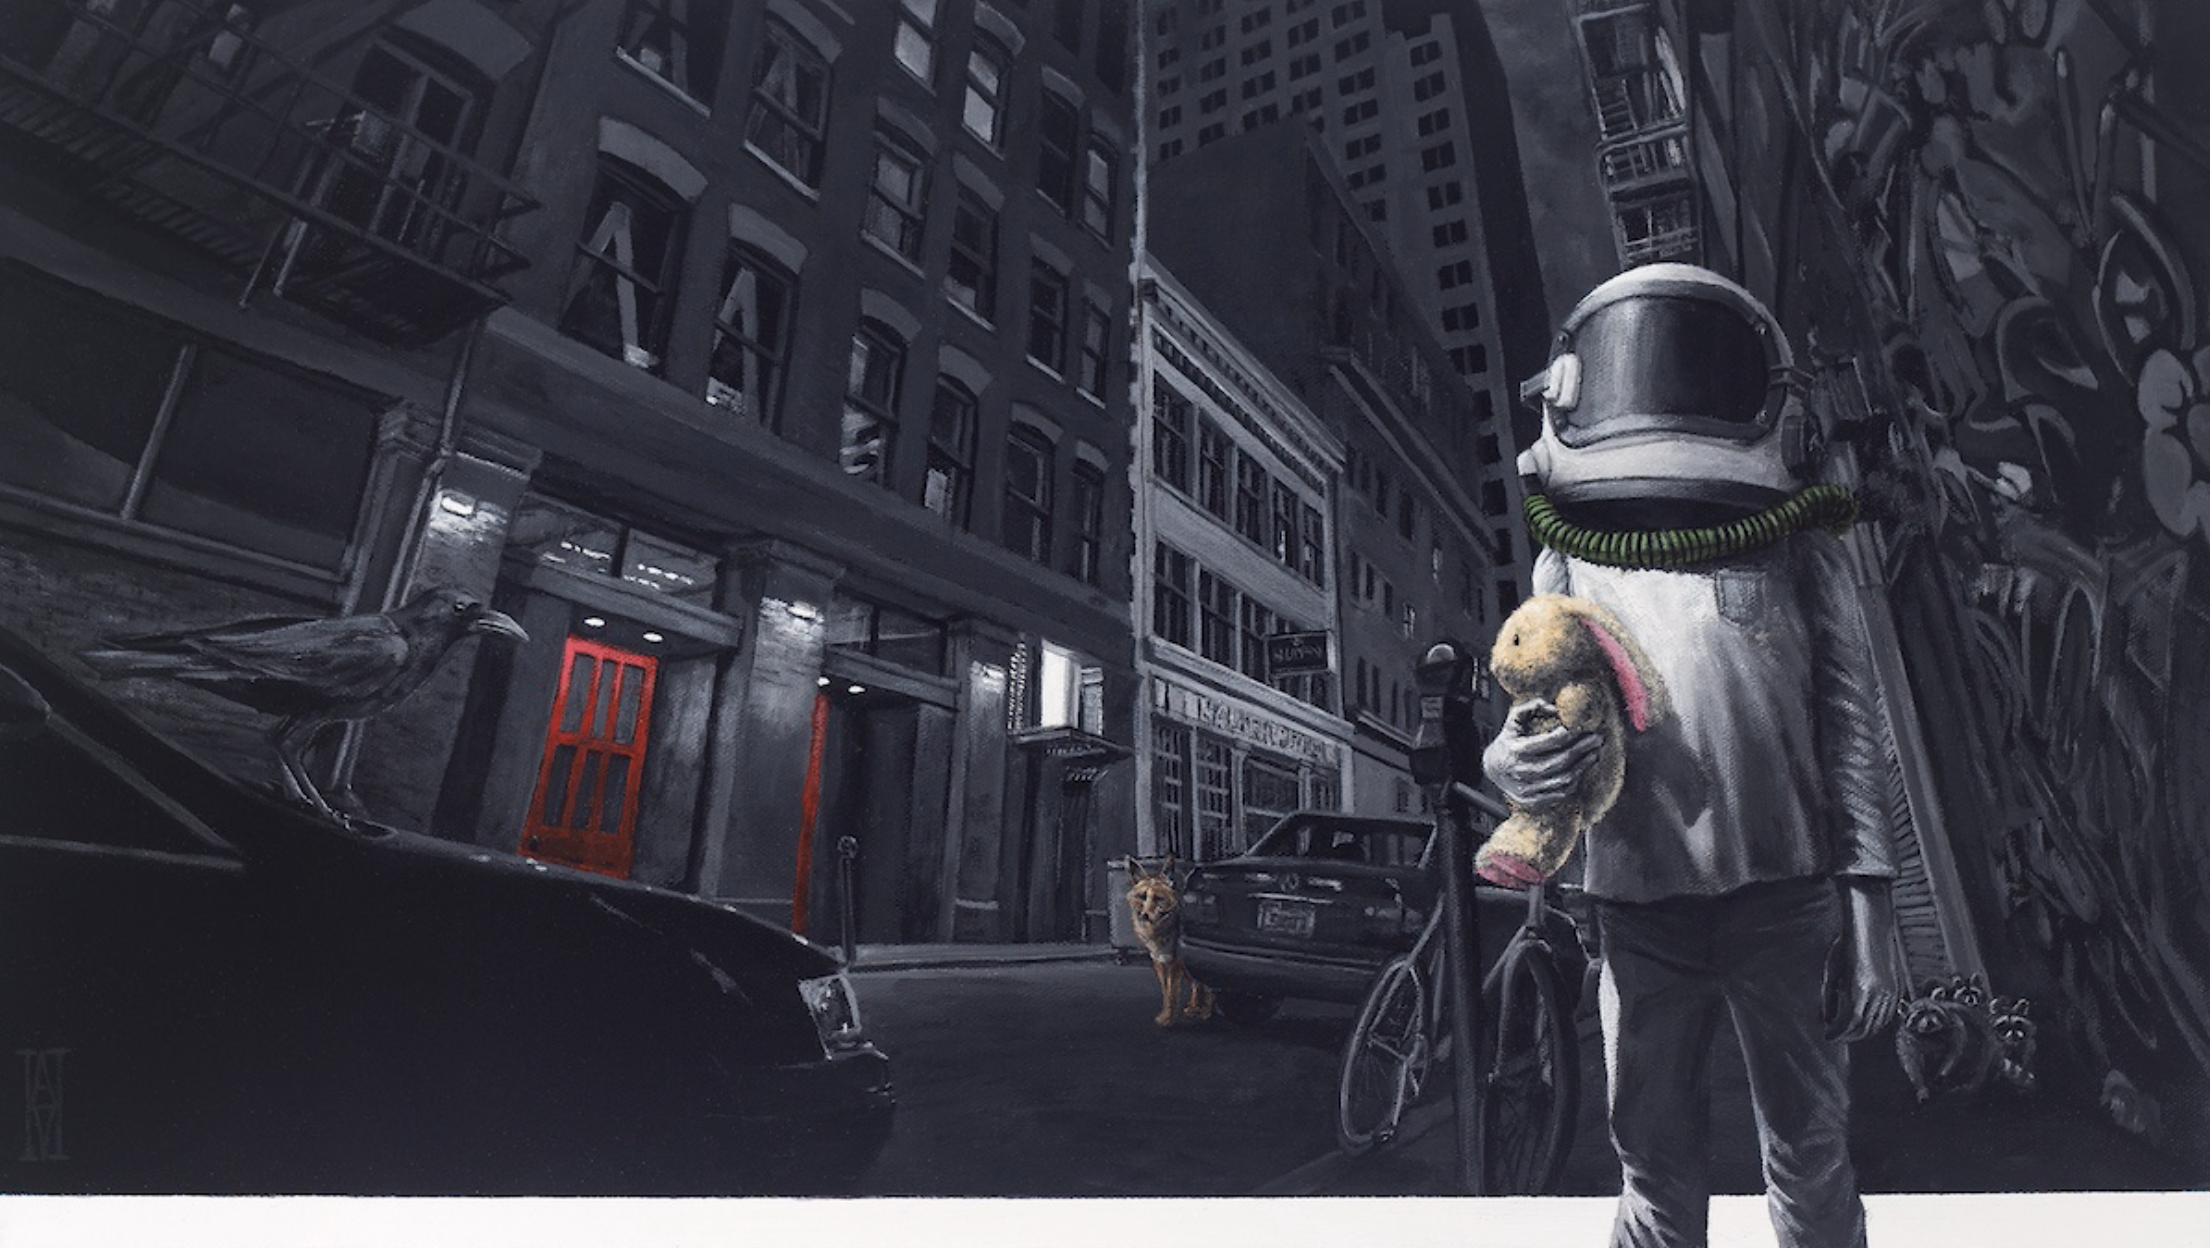 A panoramic realistic painting of a downtown San Francisco alleyway. A small child dressed as an astronaut stands across the street from a building with red doors.